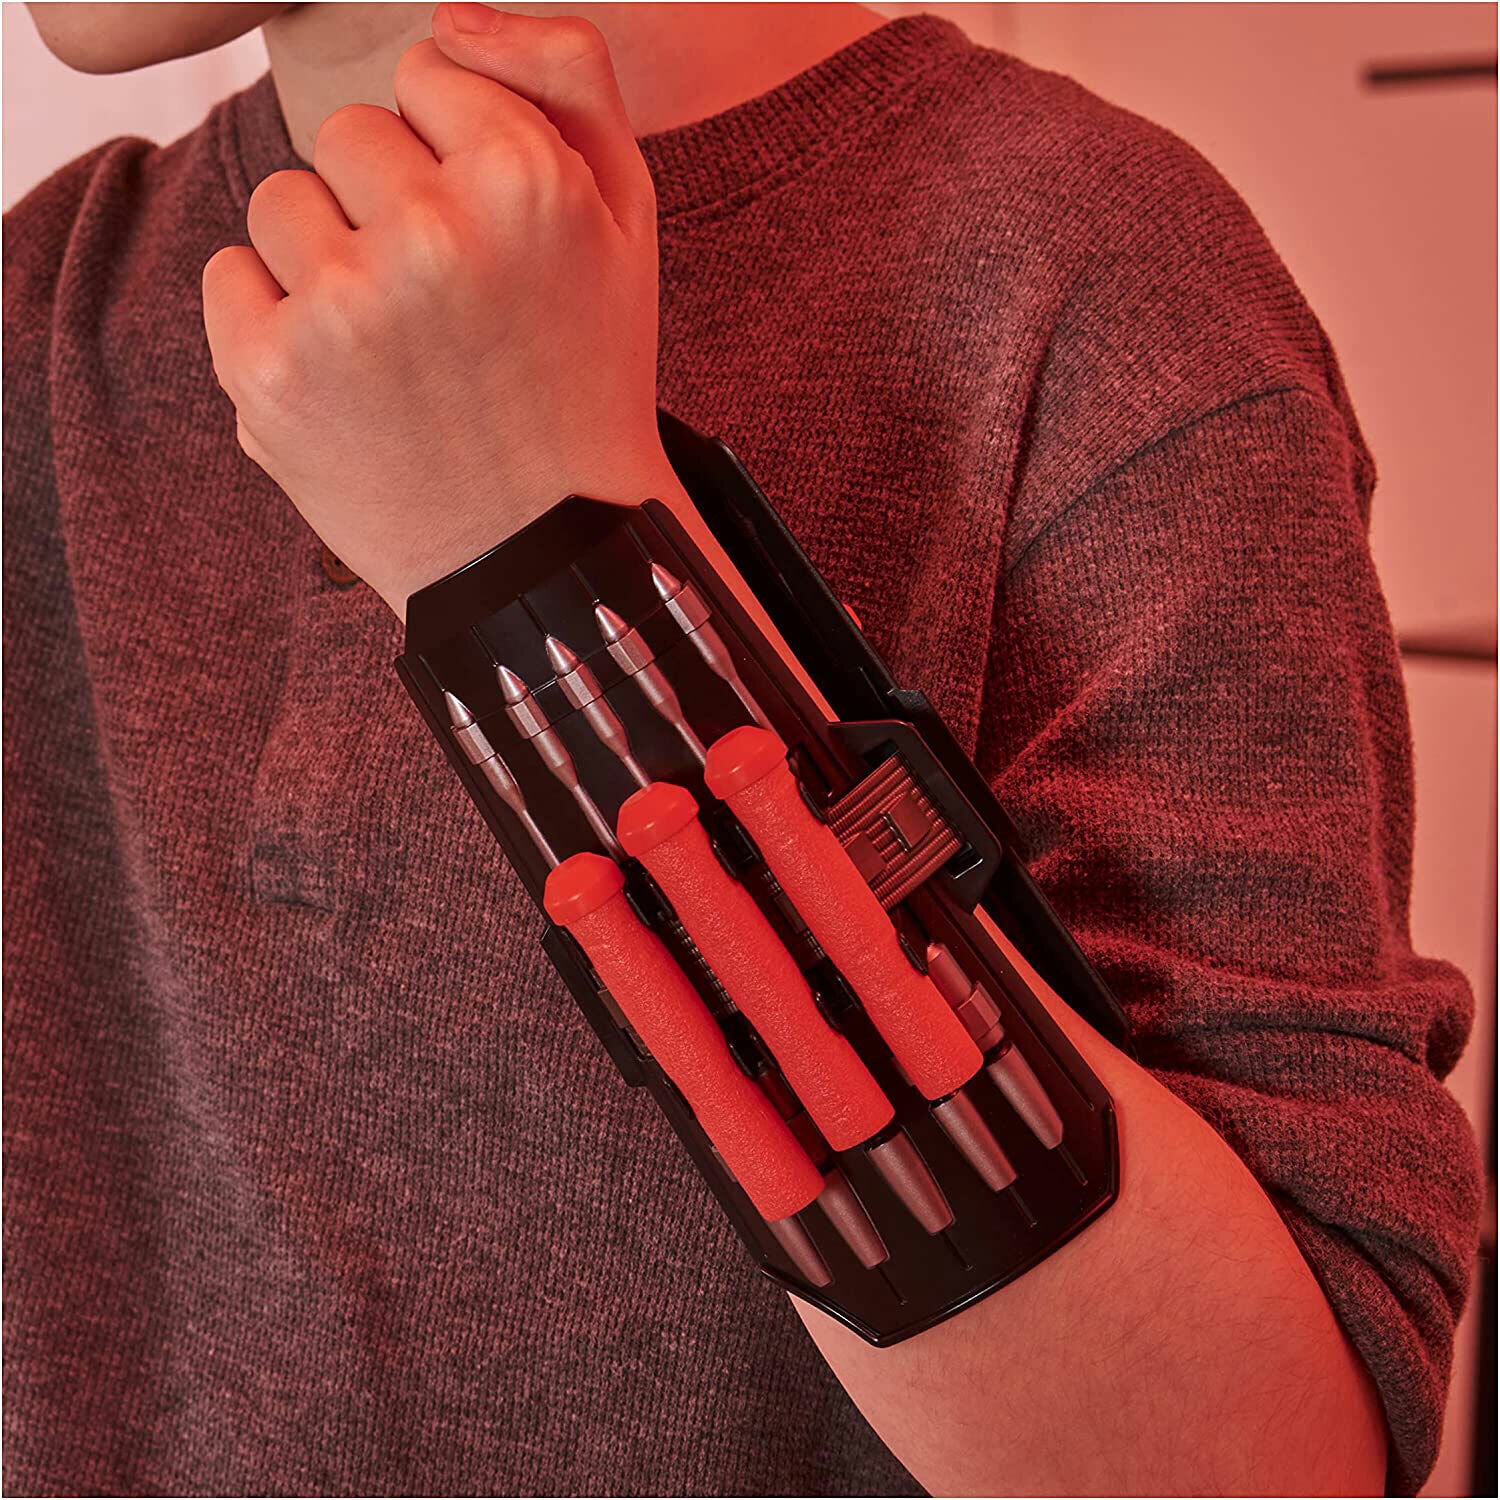 New Batman Movie Gauntlet - Ultimate Accessory for Fans!